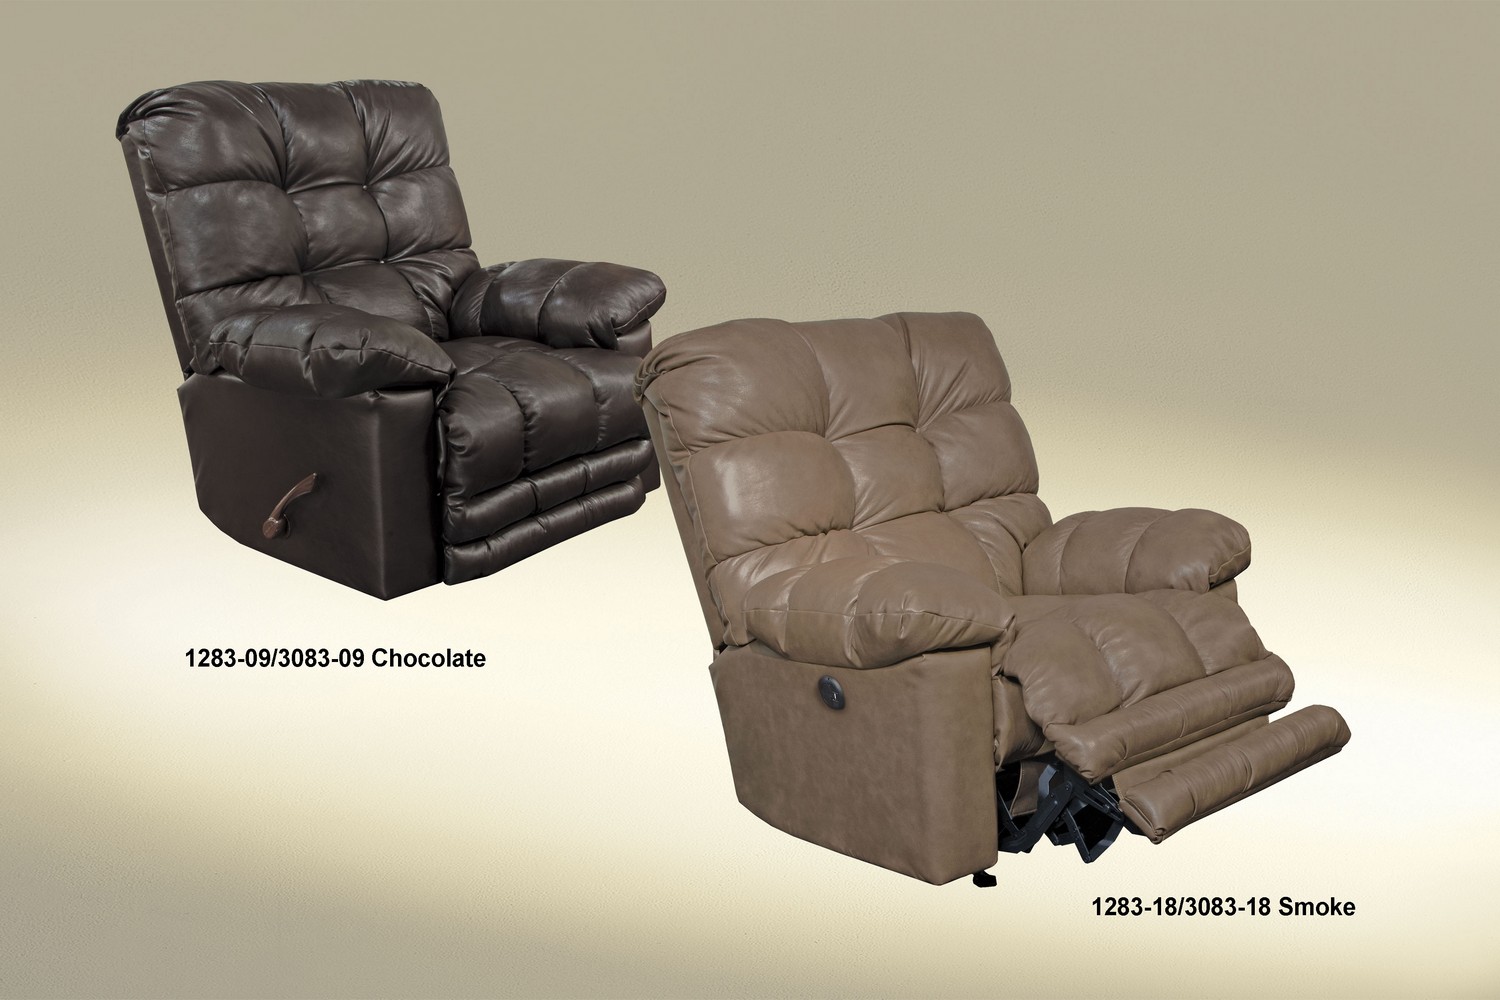 CatNapper Piazza Top Grain Leather Touch Power Lay Flat Recliner withX-tra Comfort Footrest - Chocolate